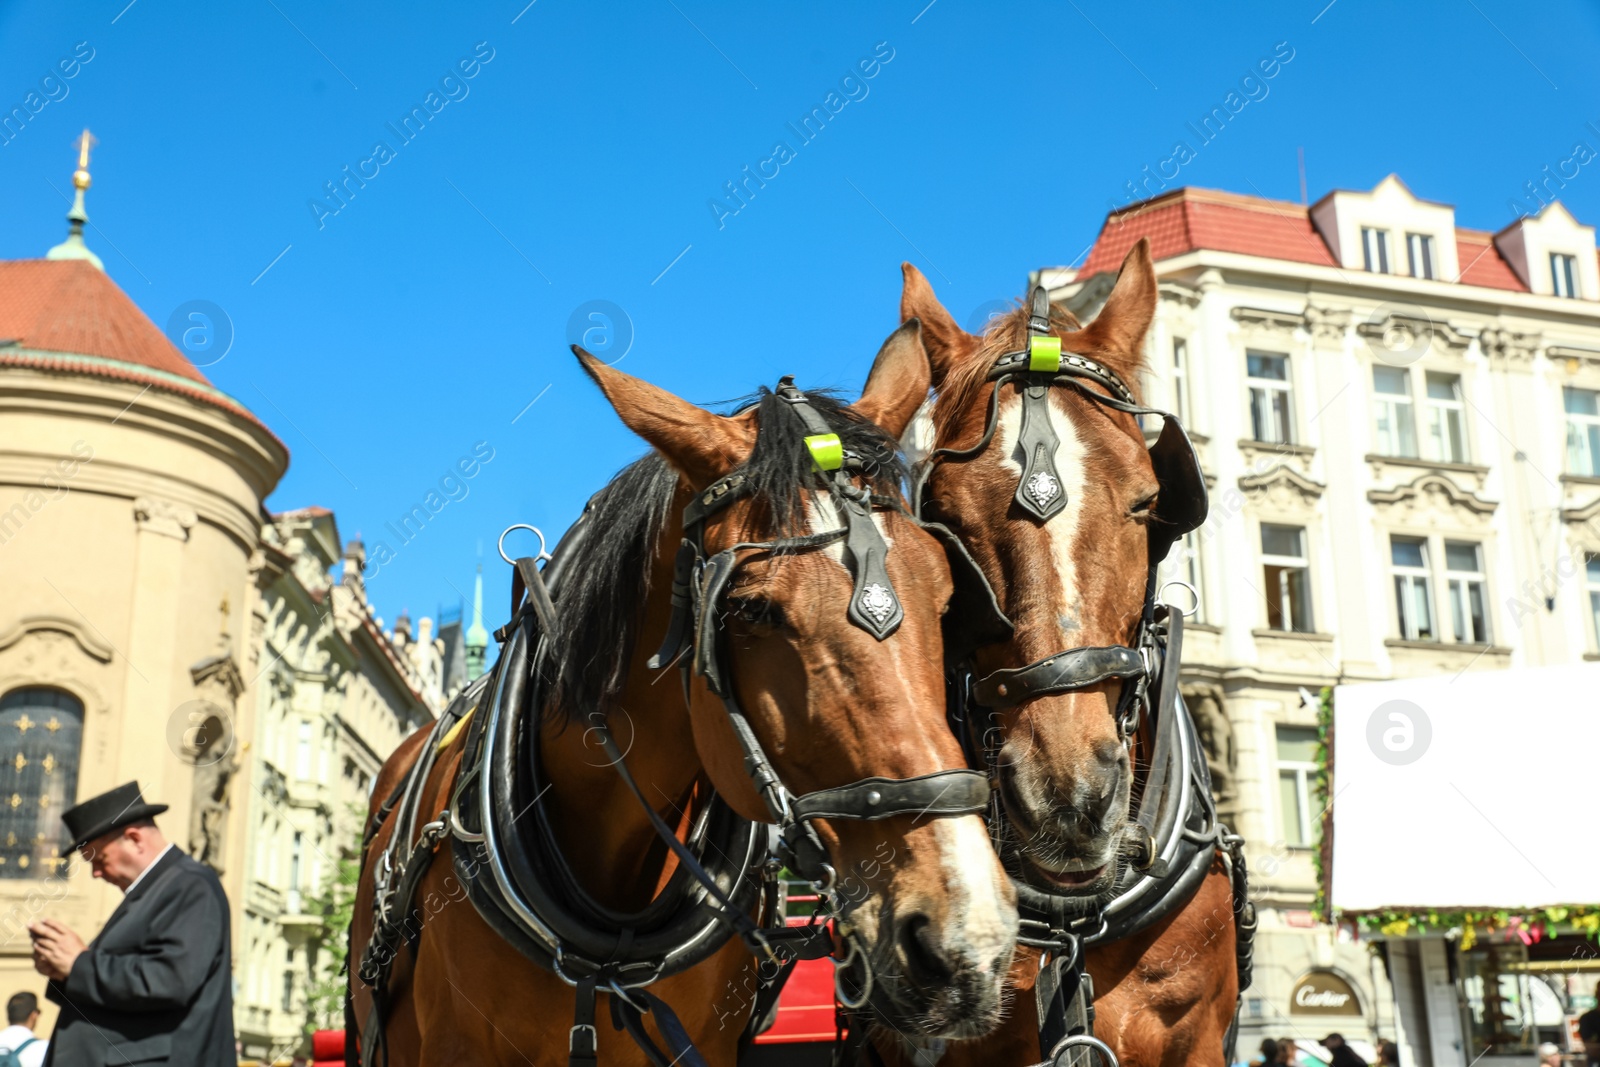 Photo of PRAGUE, CZECH REPUBLIC - APRIL 25, 2019: Harnessed horses with carriage on city street